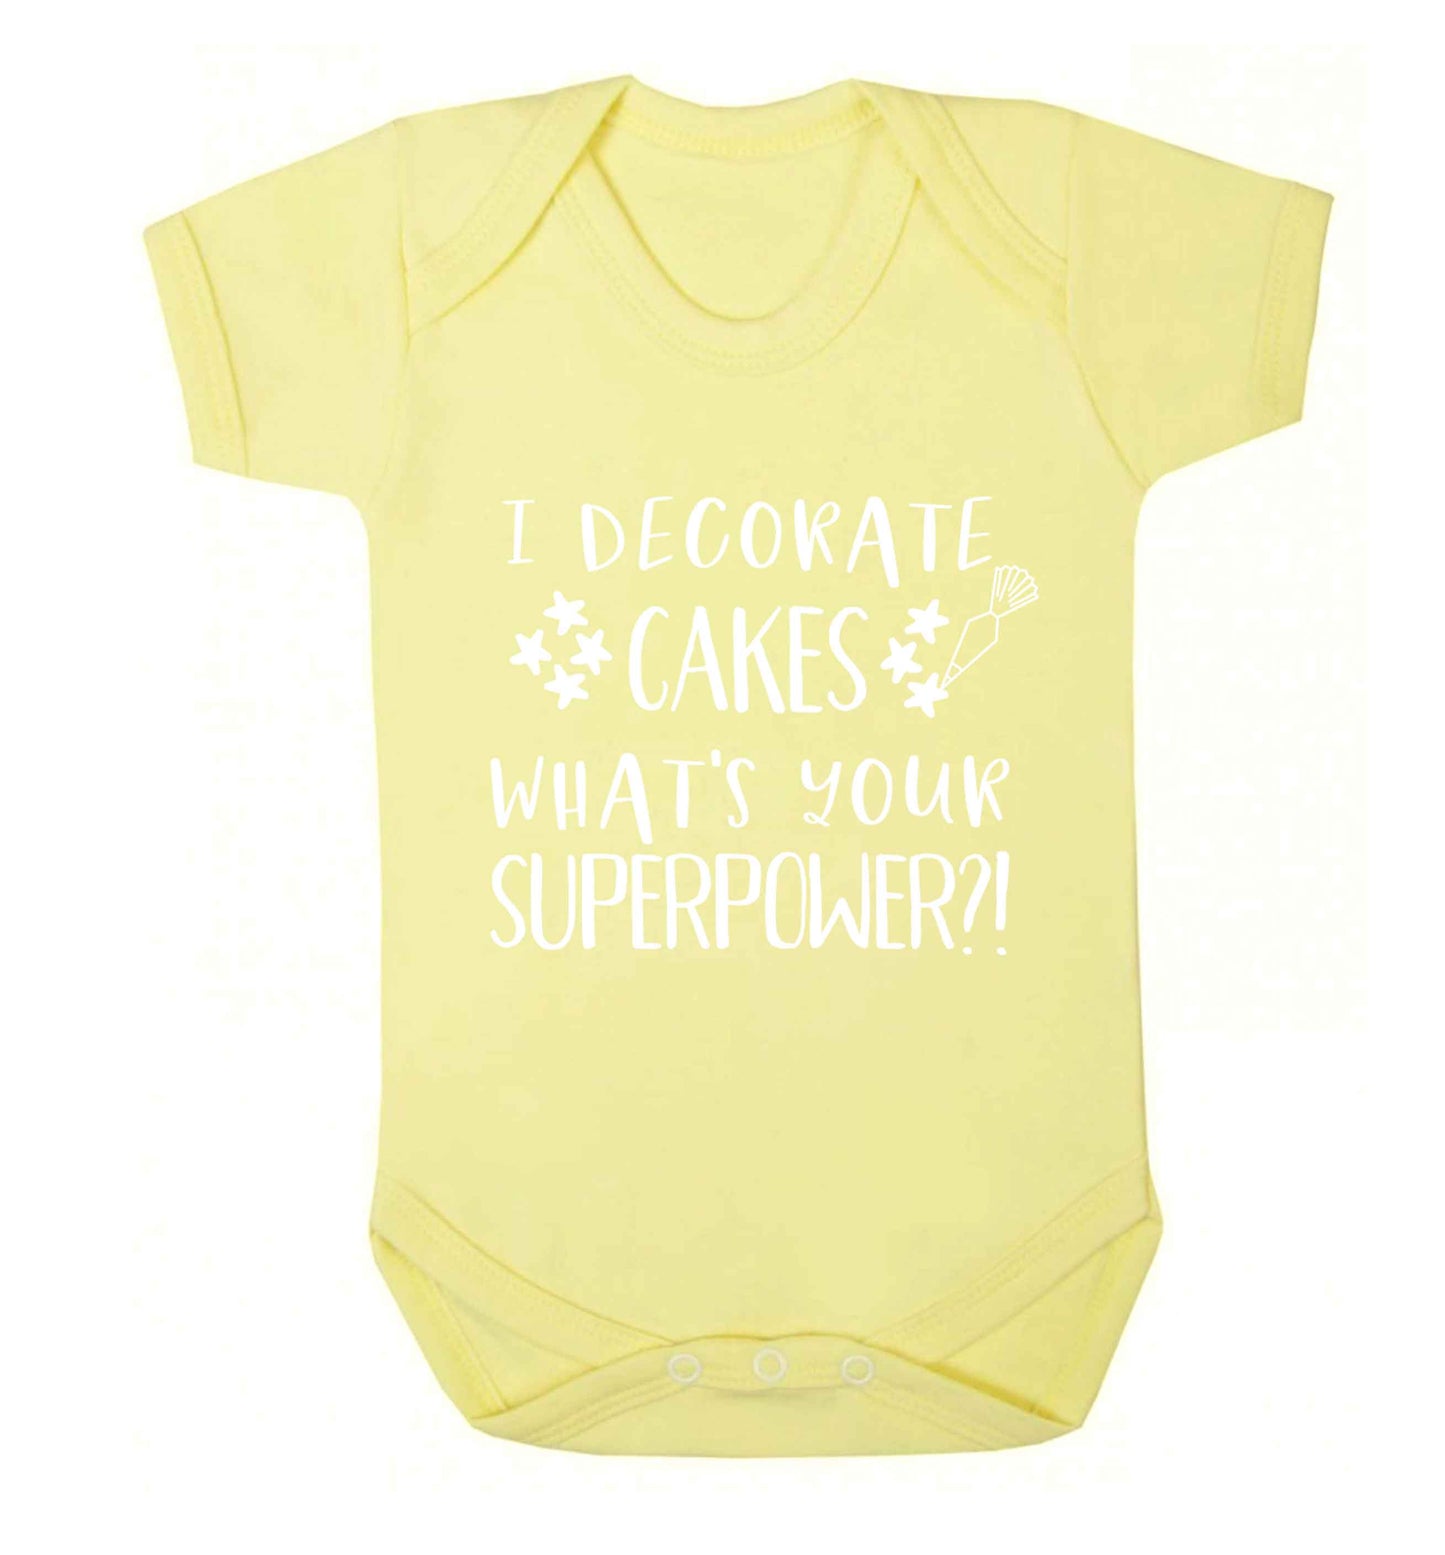 I decorate cakes what's your superpower?! Baby Vest pale yellow 18-24 months